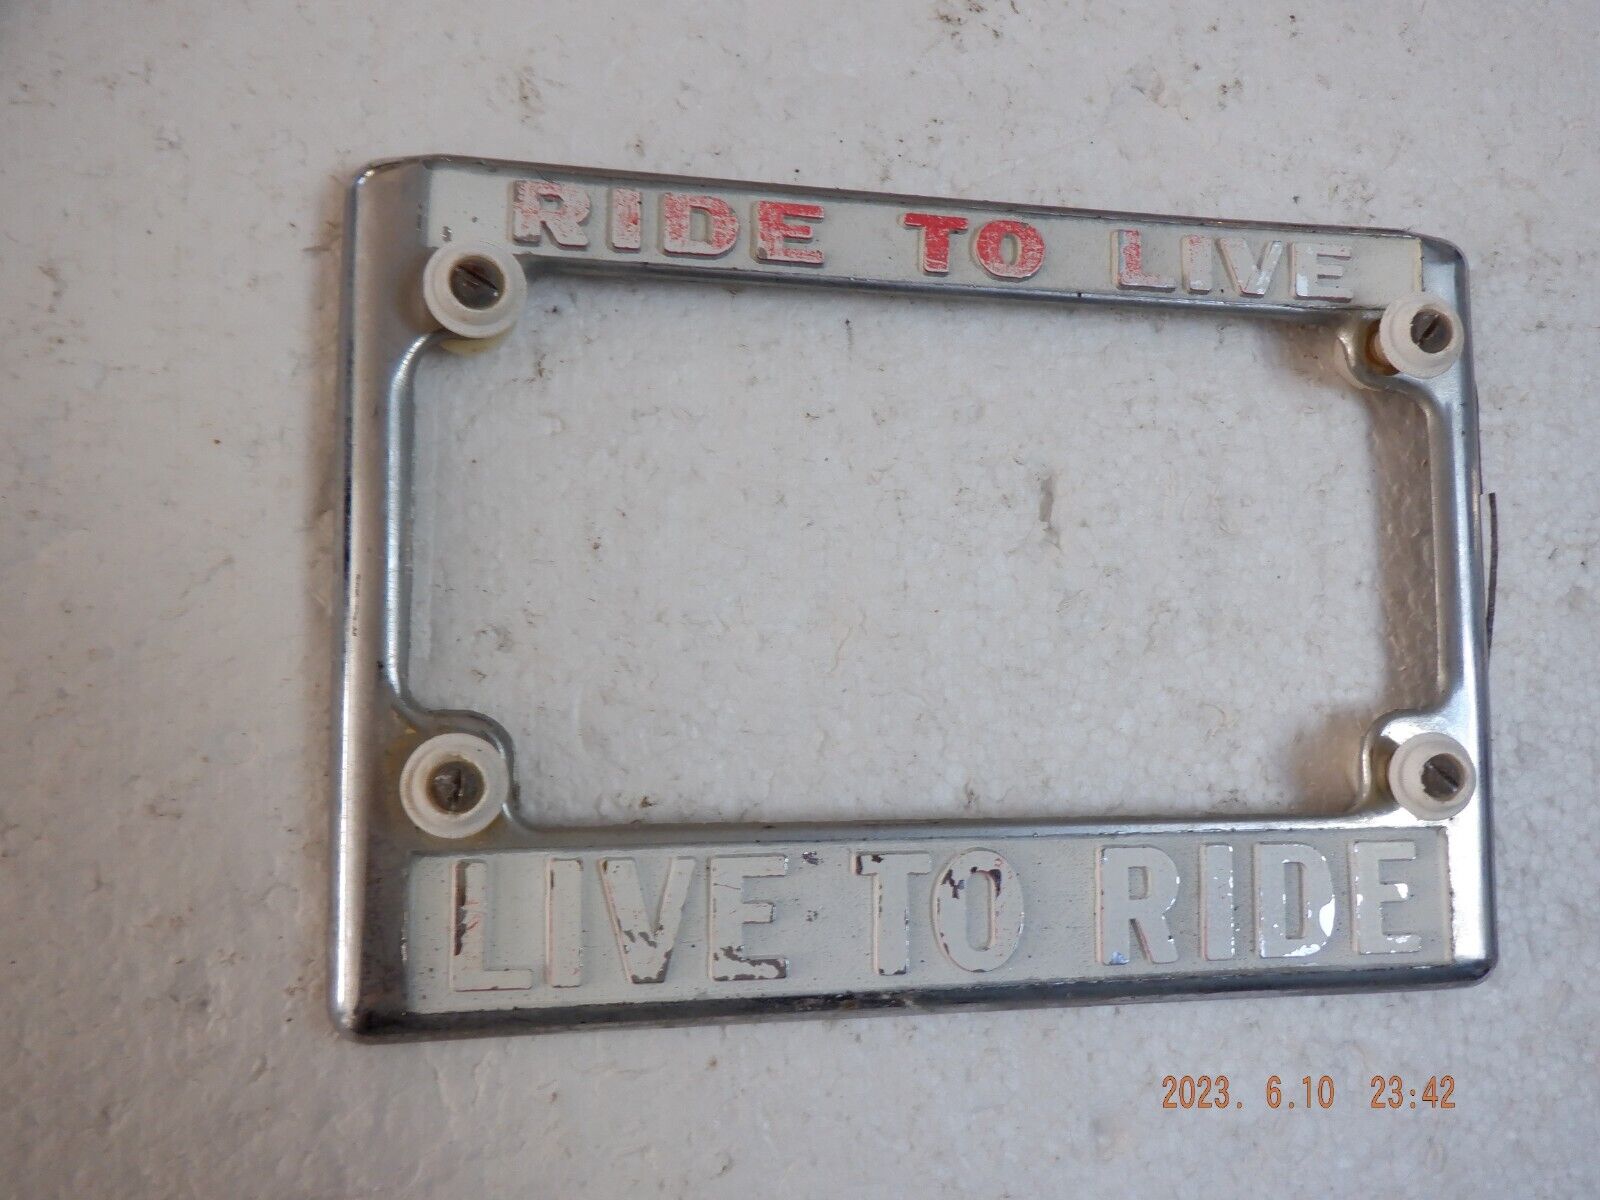 "LIVE TO RIDE"  "RIDE TO LIVE" CHROME  MOTORCYCLE LICENSE PLATE FRAME HOLDER